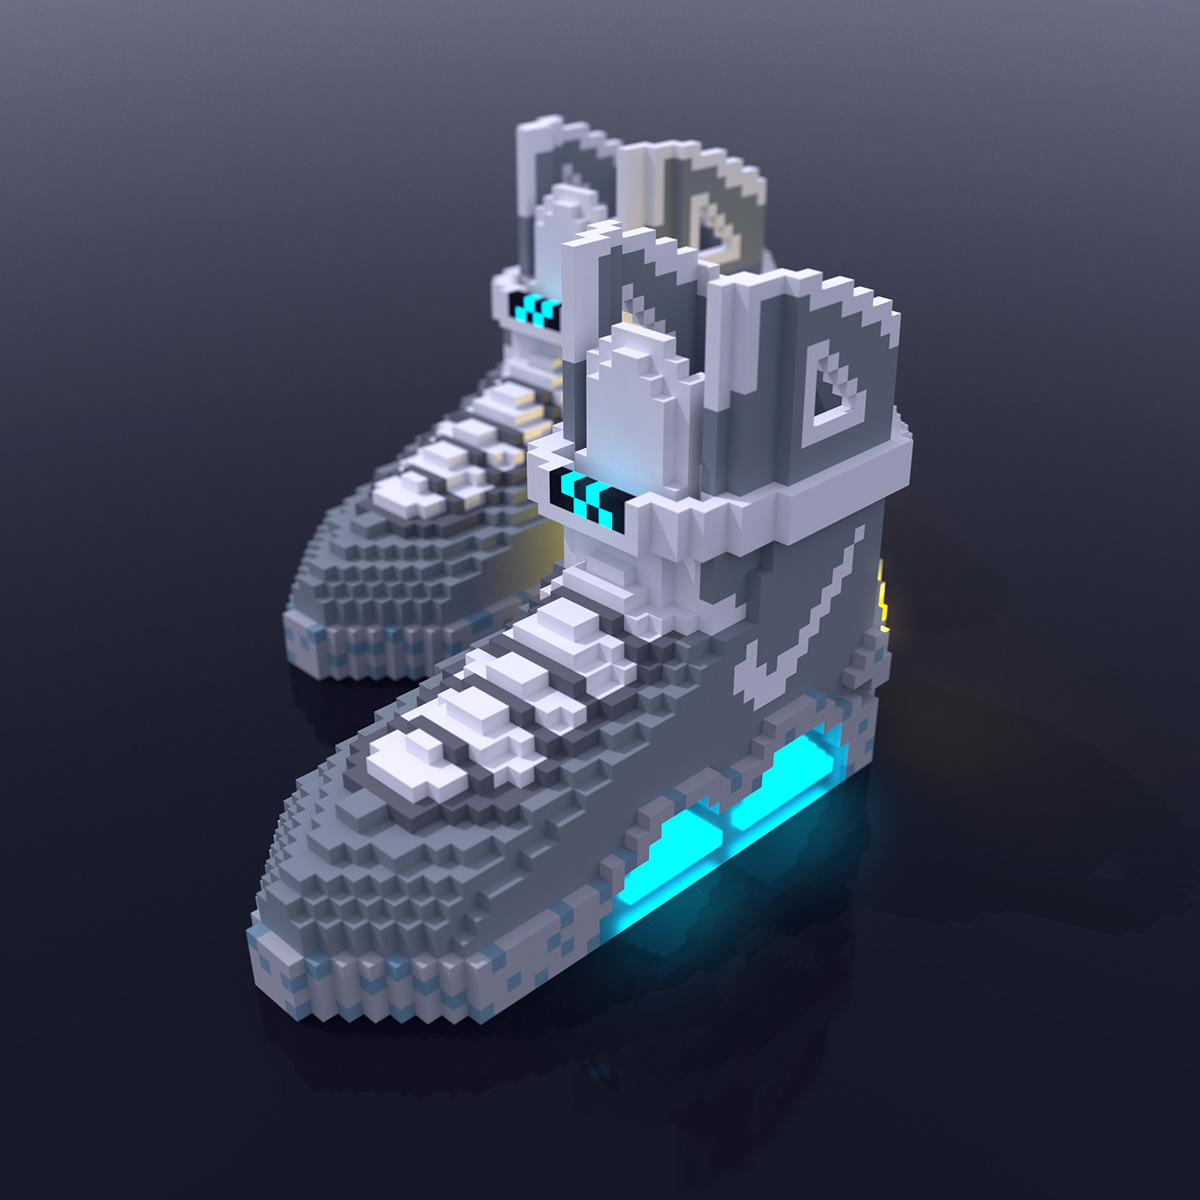 Nike bttf Marty Mcfly shoes nike mags Magicavoxel voxel voxel art